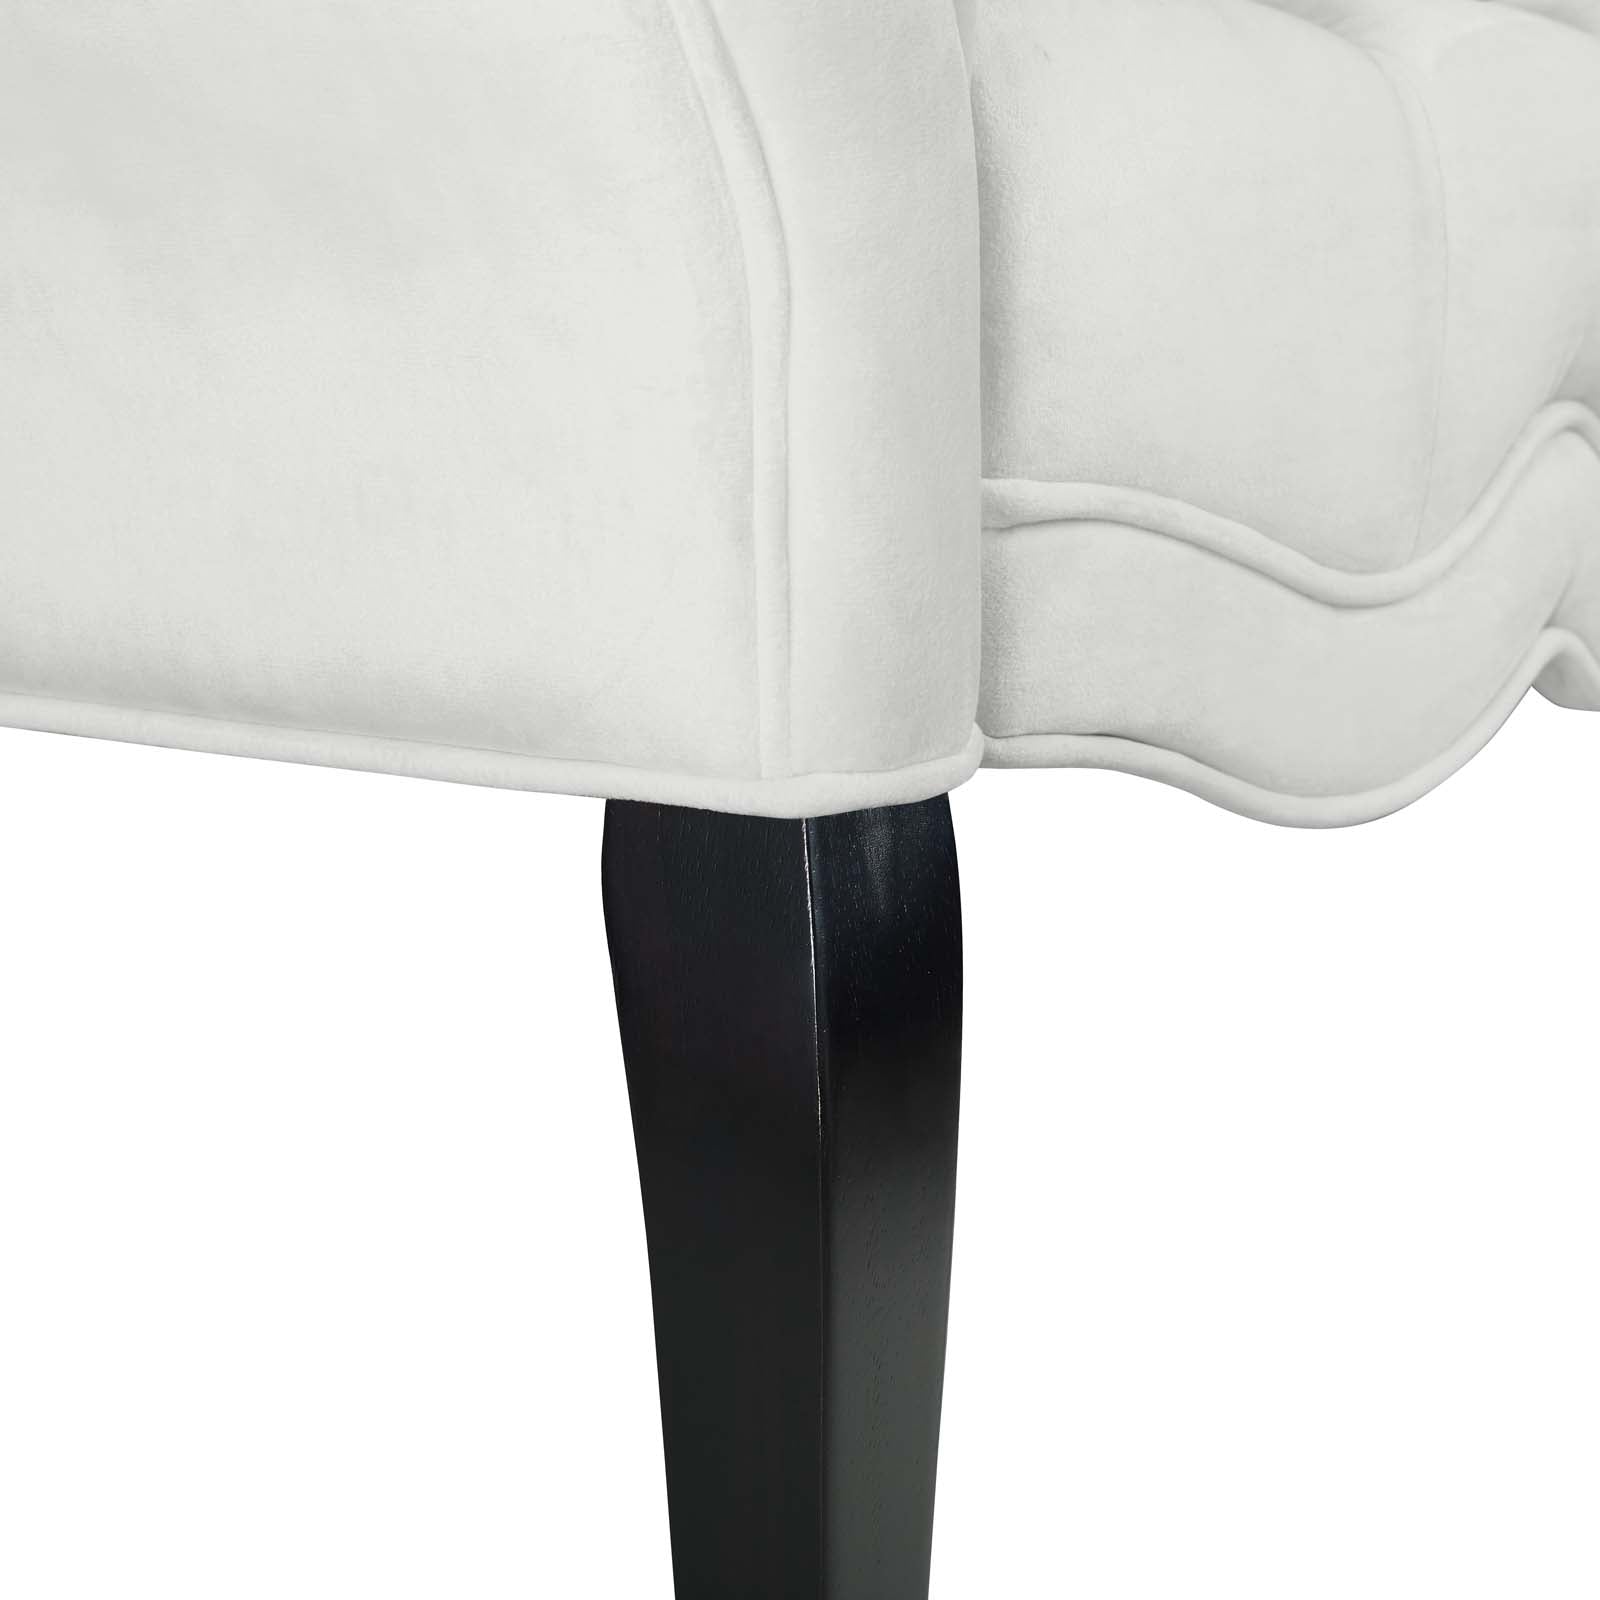 Modway Benches - Adelia Chesterfield Style Button Tufted Performance Velvet Bench White